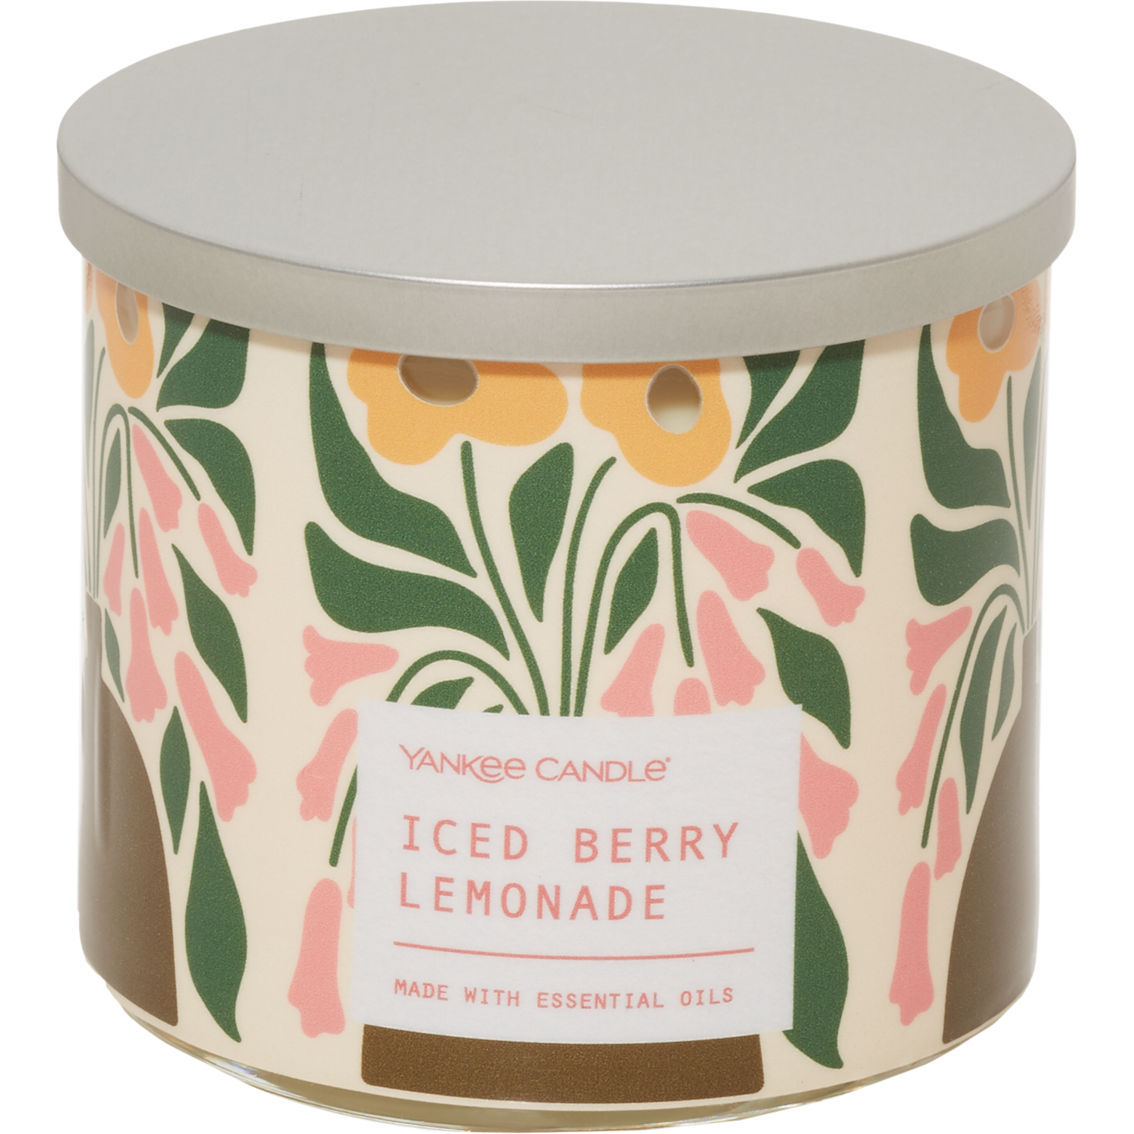 Yankee Candle Iced Berry Lemonade 3-Wick Candle - Image 2 of 2